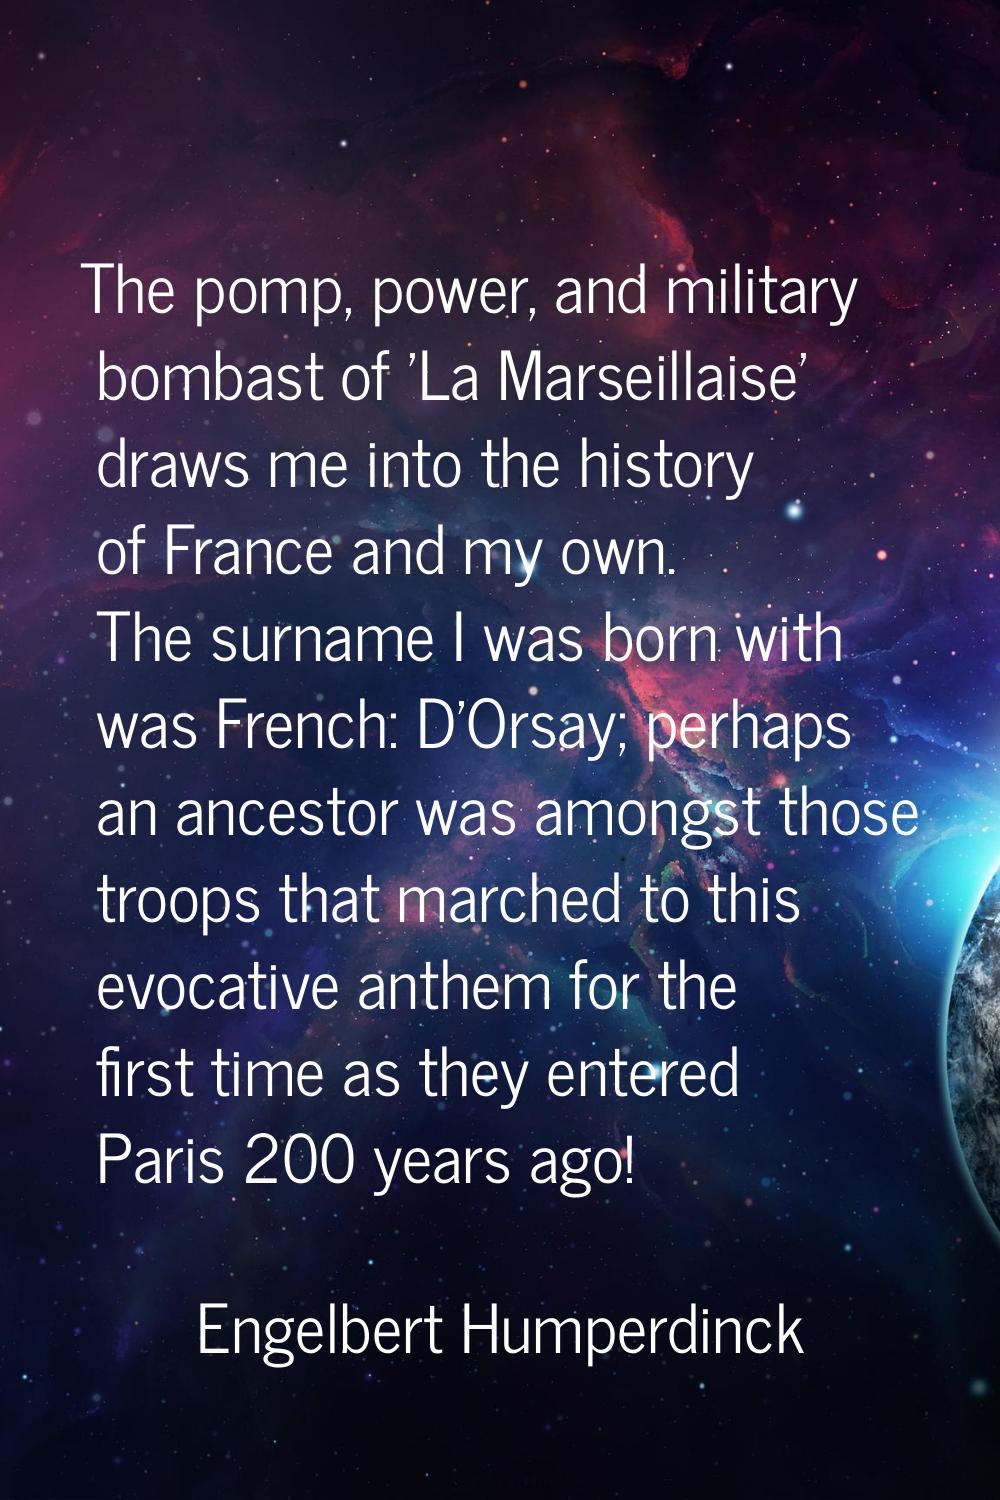 The pomp, power, and military bombast of 'La Marseillaise' draws me into the history of France and 